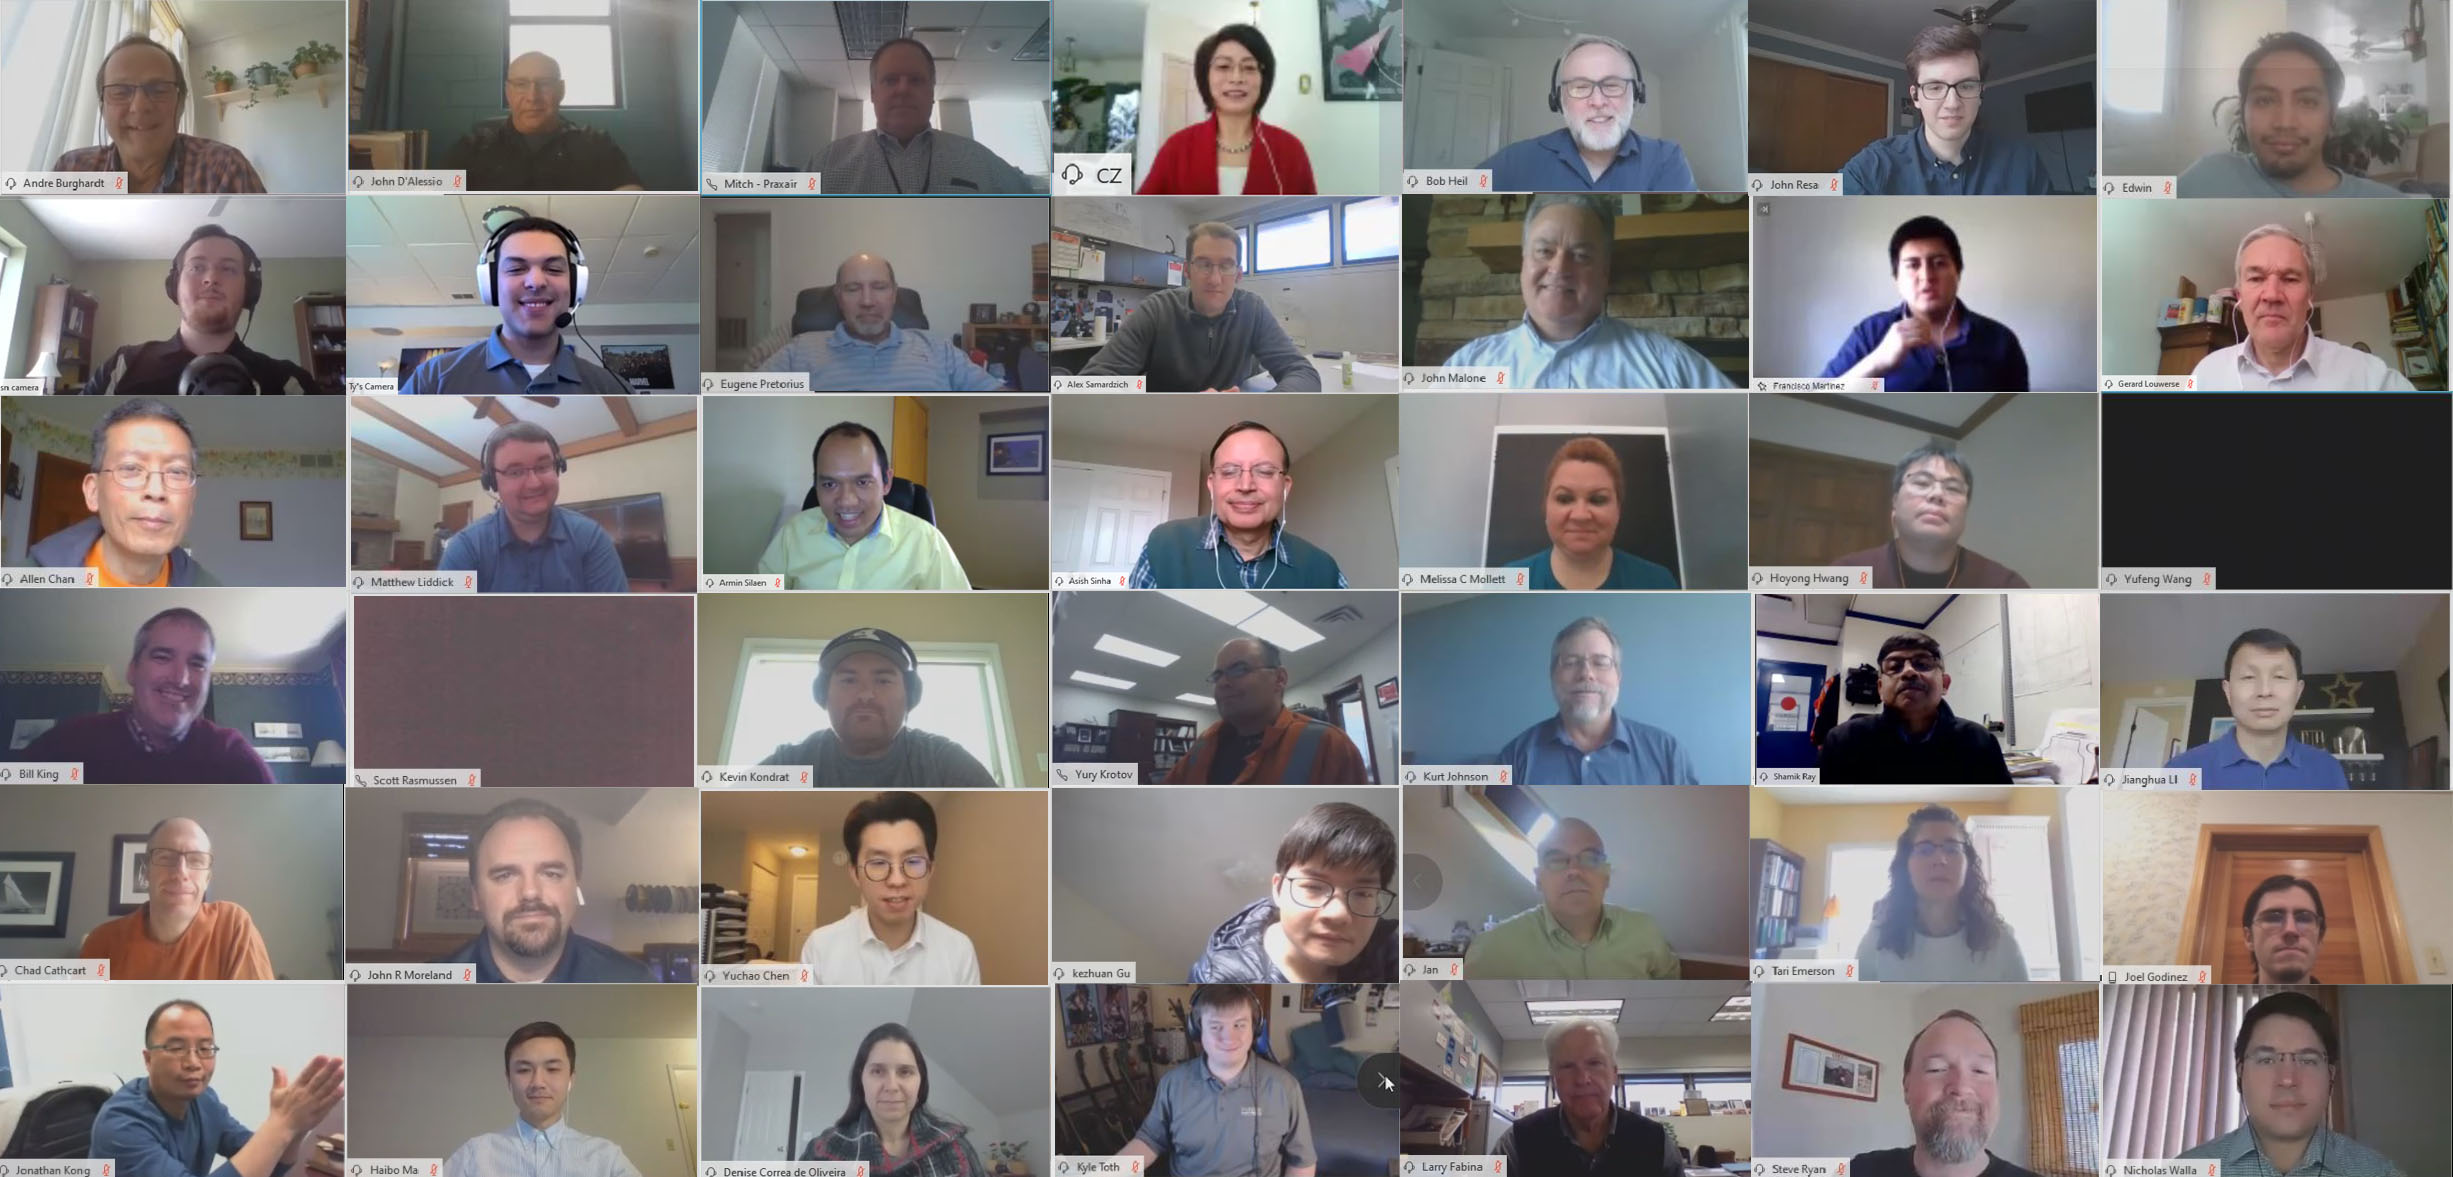 Full Image compilation of people that joined the event with their webcams